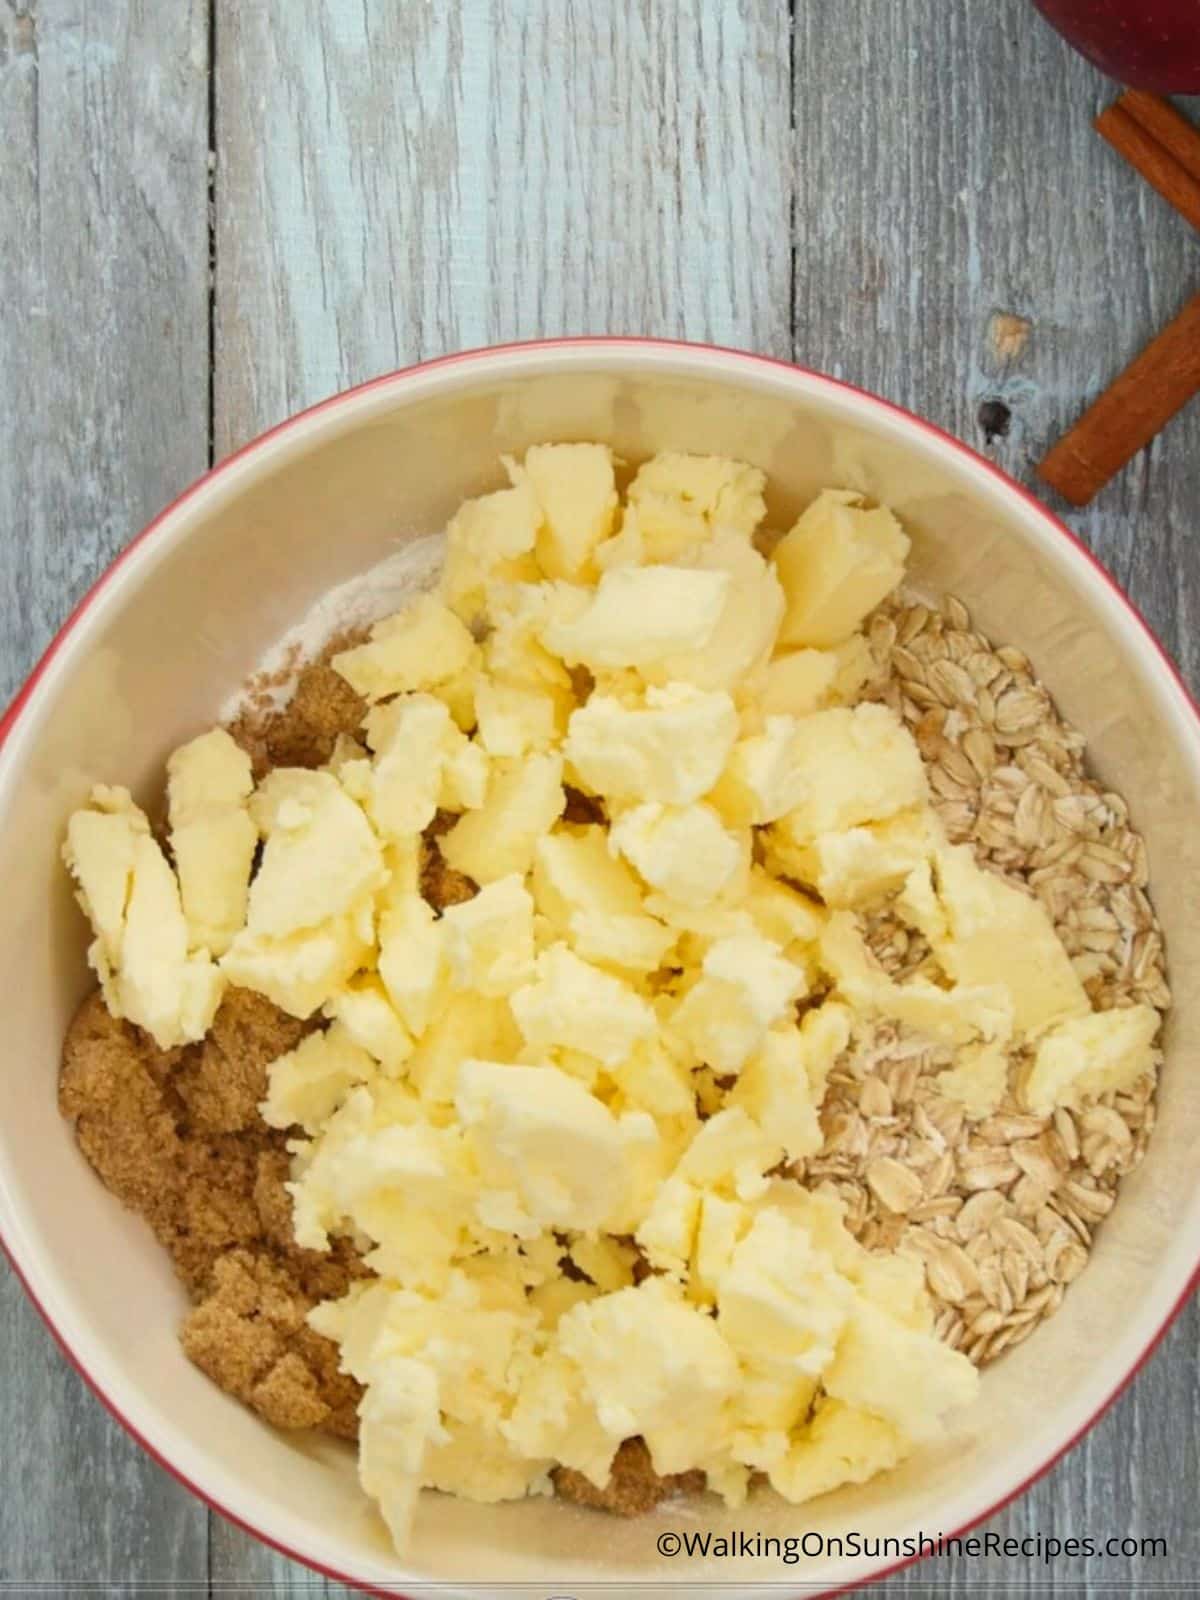 Add butter to the topping for apple crisp.